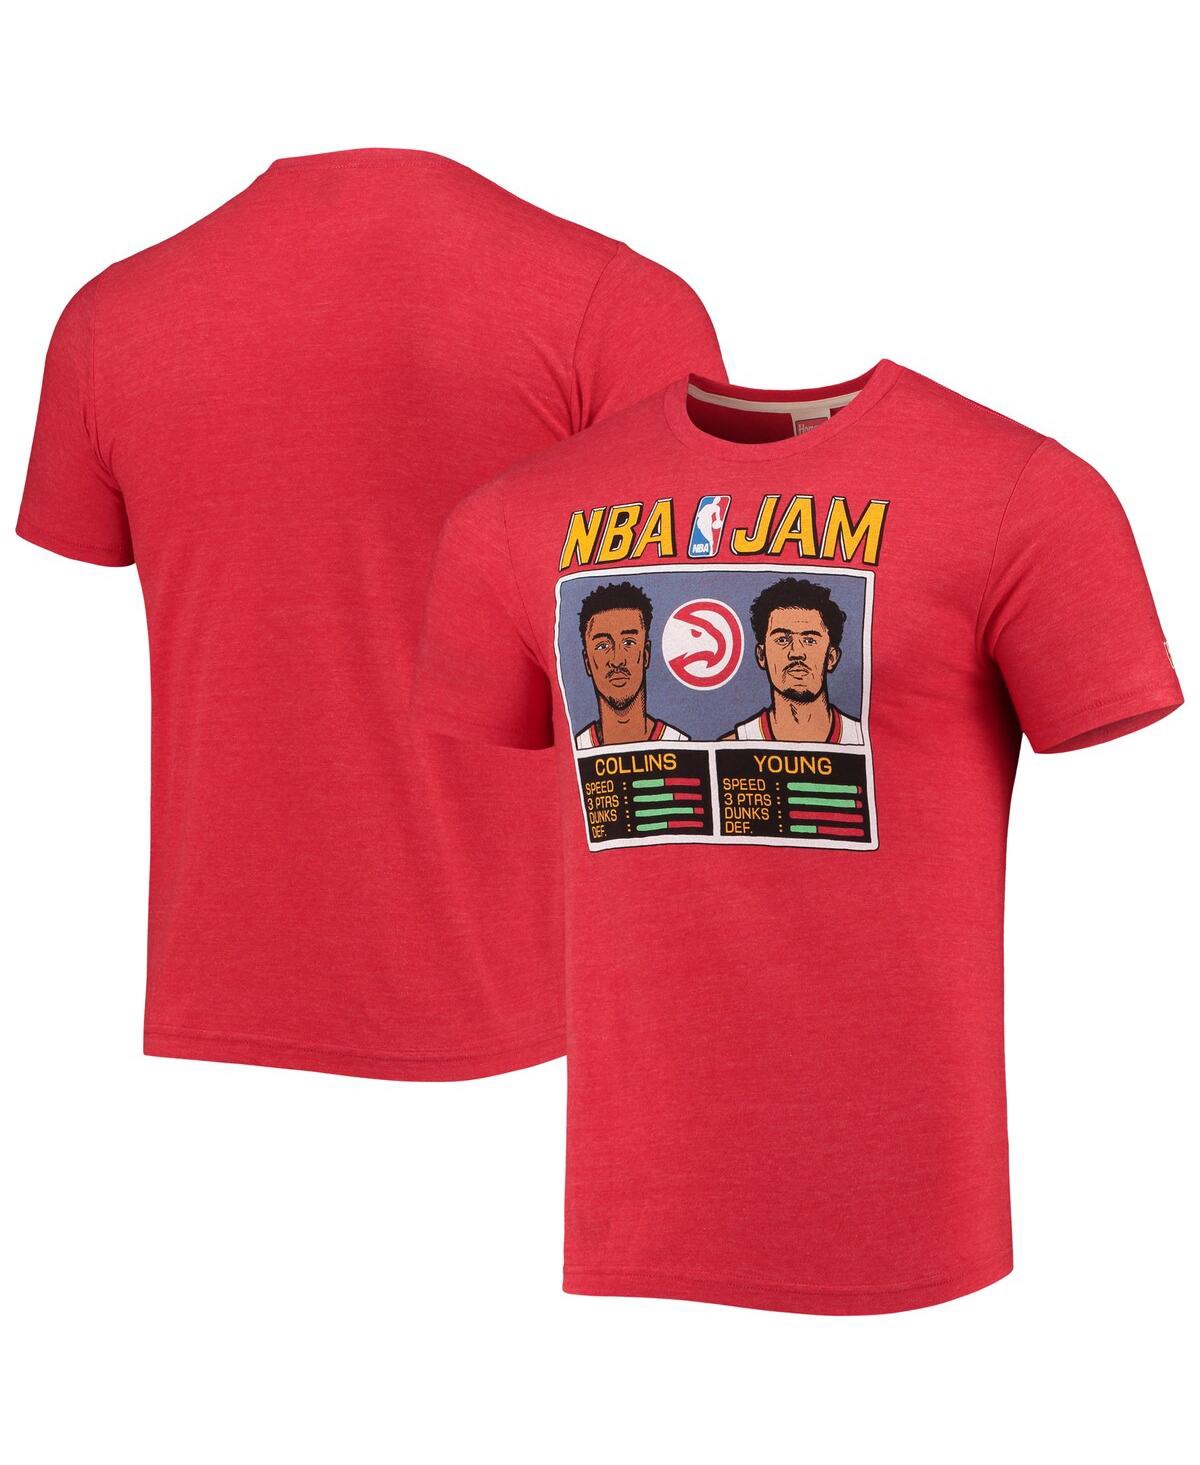 Men's John Collins & Trae Young Heathered Red Nba Jam Tri-Blend T-shirt - Heathered Red